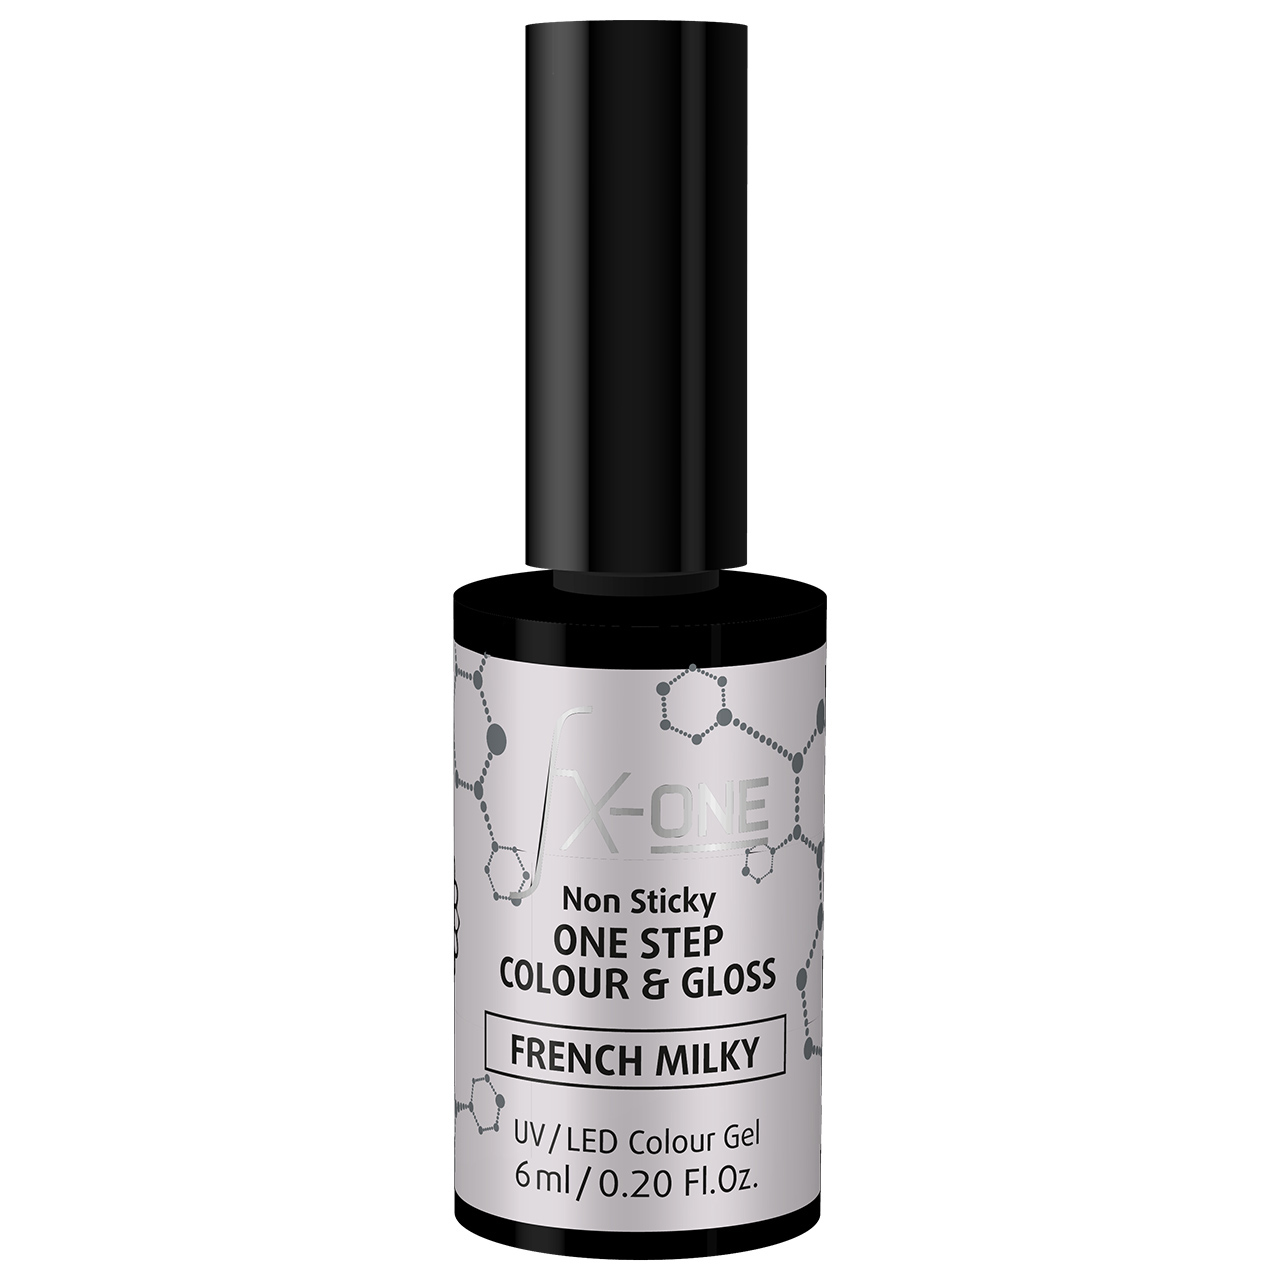 FX-One Colour & Gloss French Milky